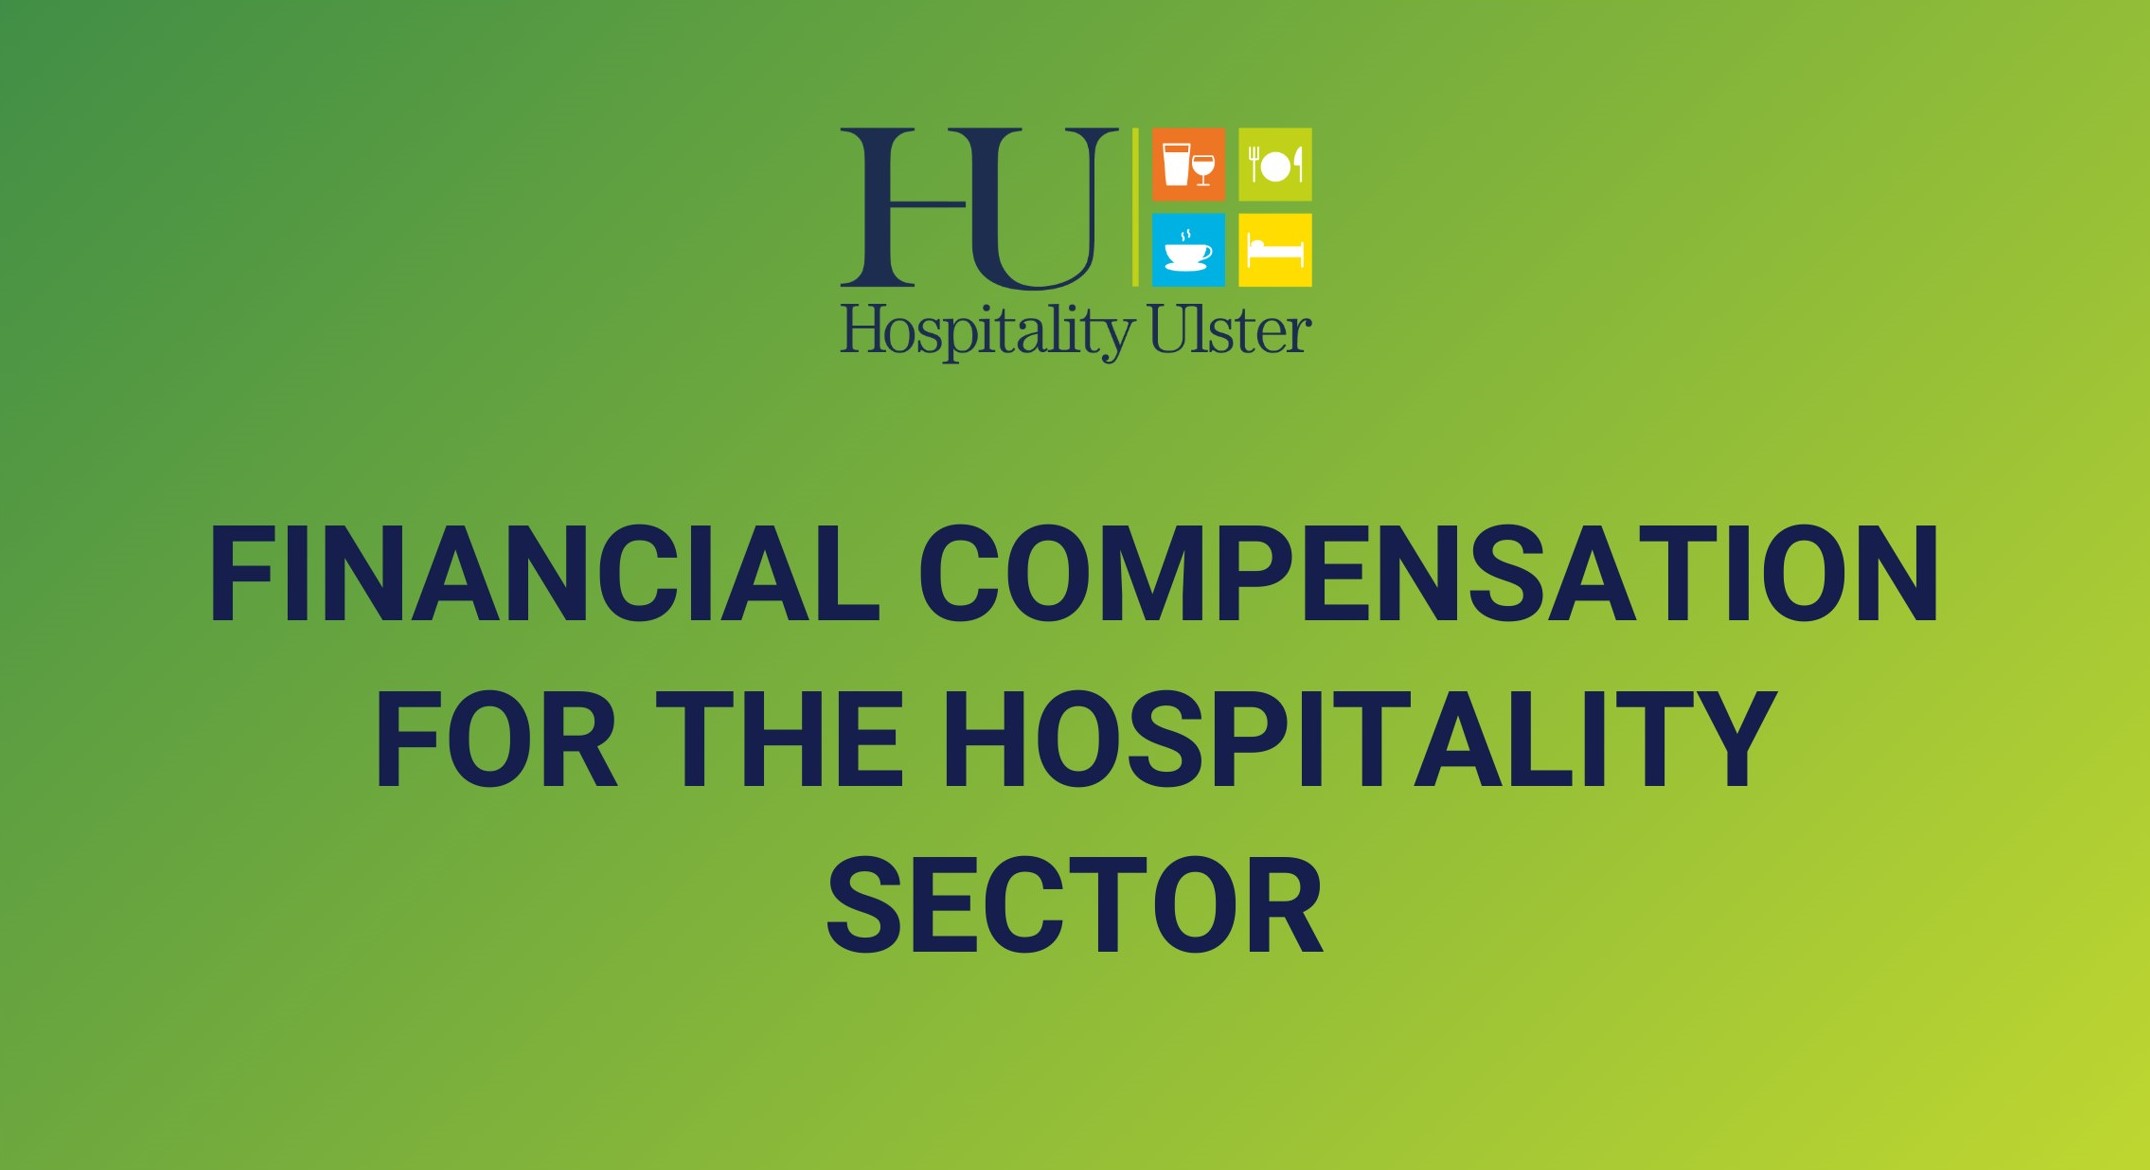 FINANCIAL COMPENSATION FOR THE HOSPITALITY SECTOR